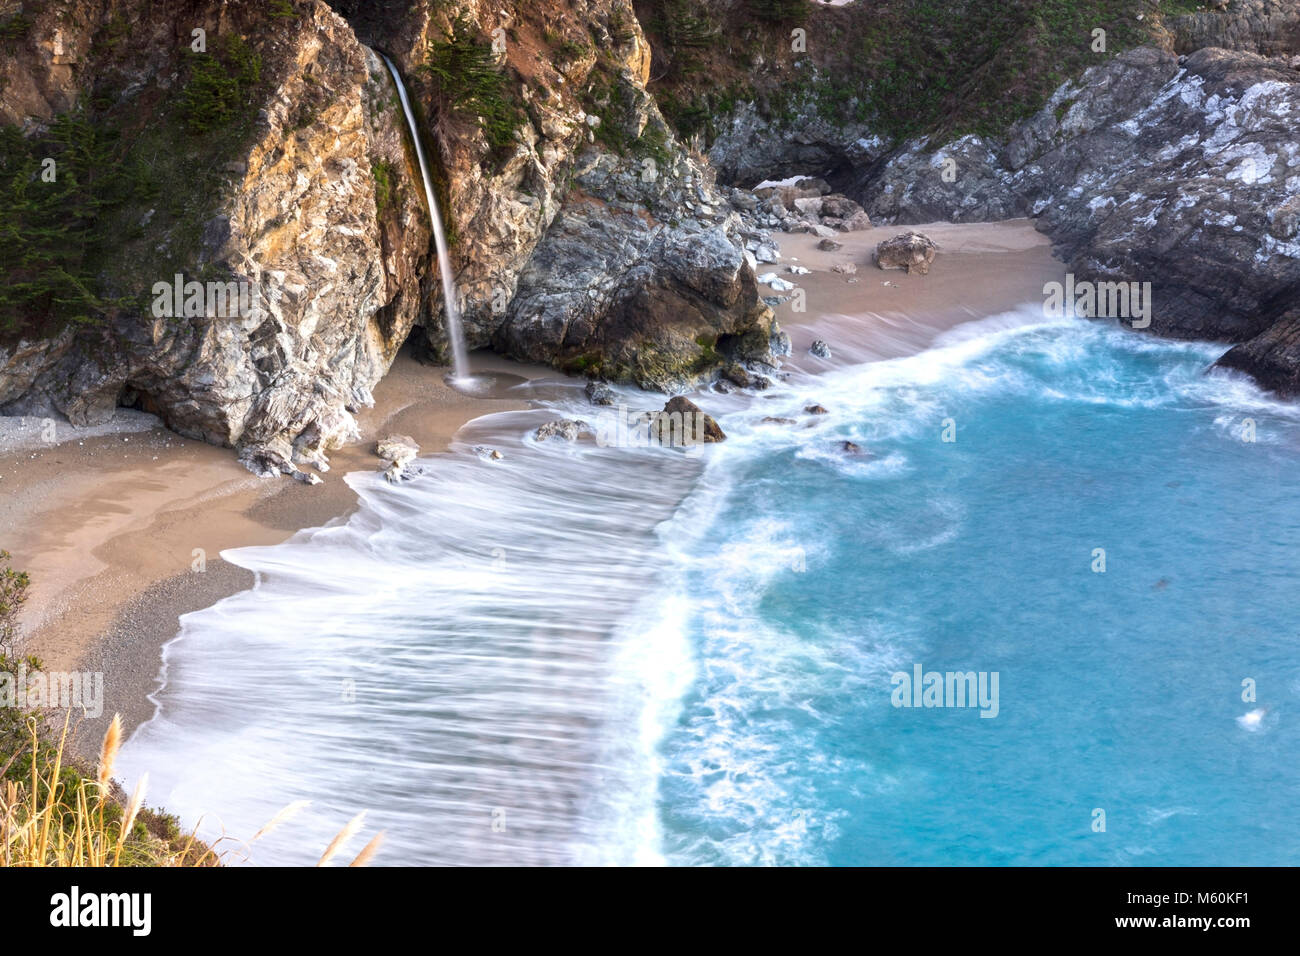 McWay Falls Scenic Waterfall Landscape Aerial Beach View on Big Sur Coast in Central California, Julia Pfeiffer Burns State Park Stock Photo